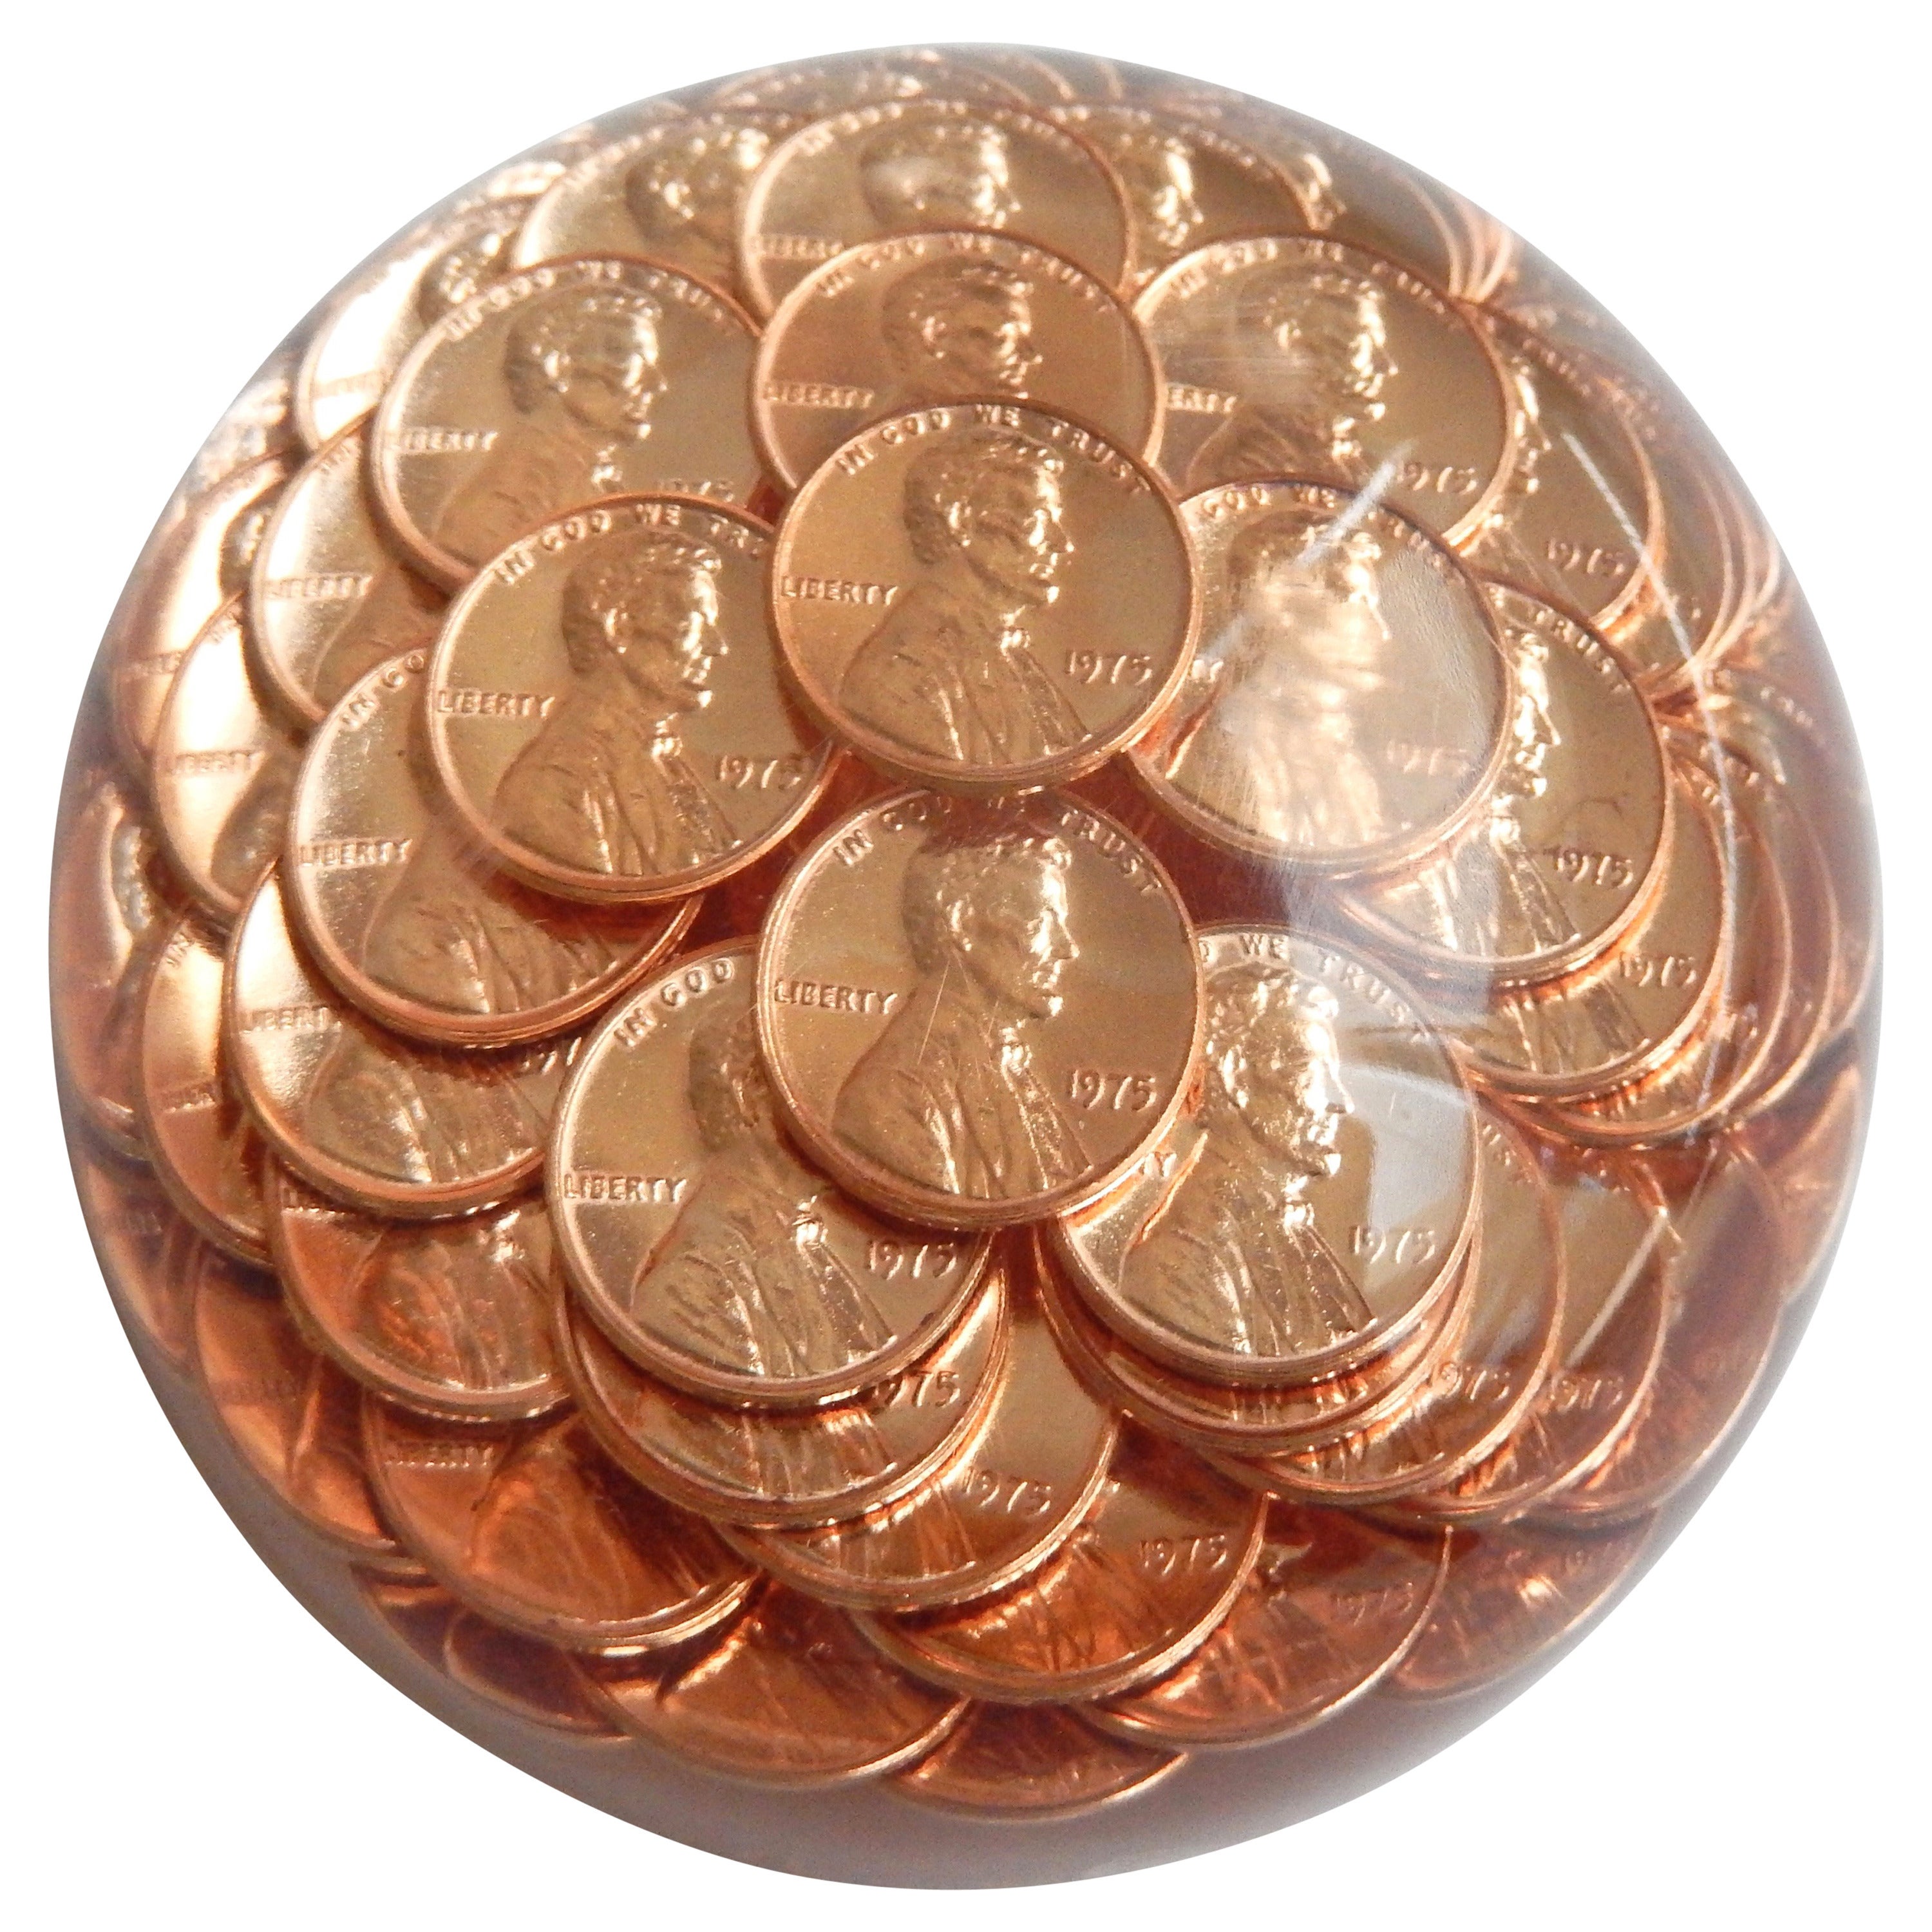 1975 Lucite Paperweight with Suspended Pennies